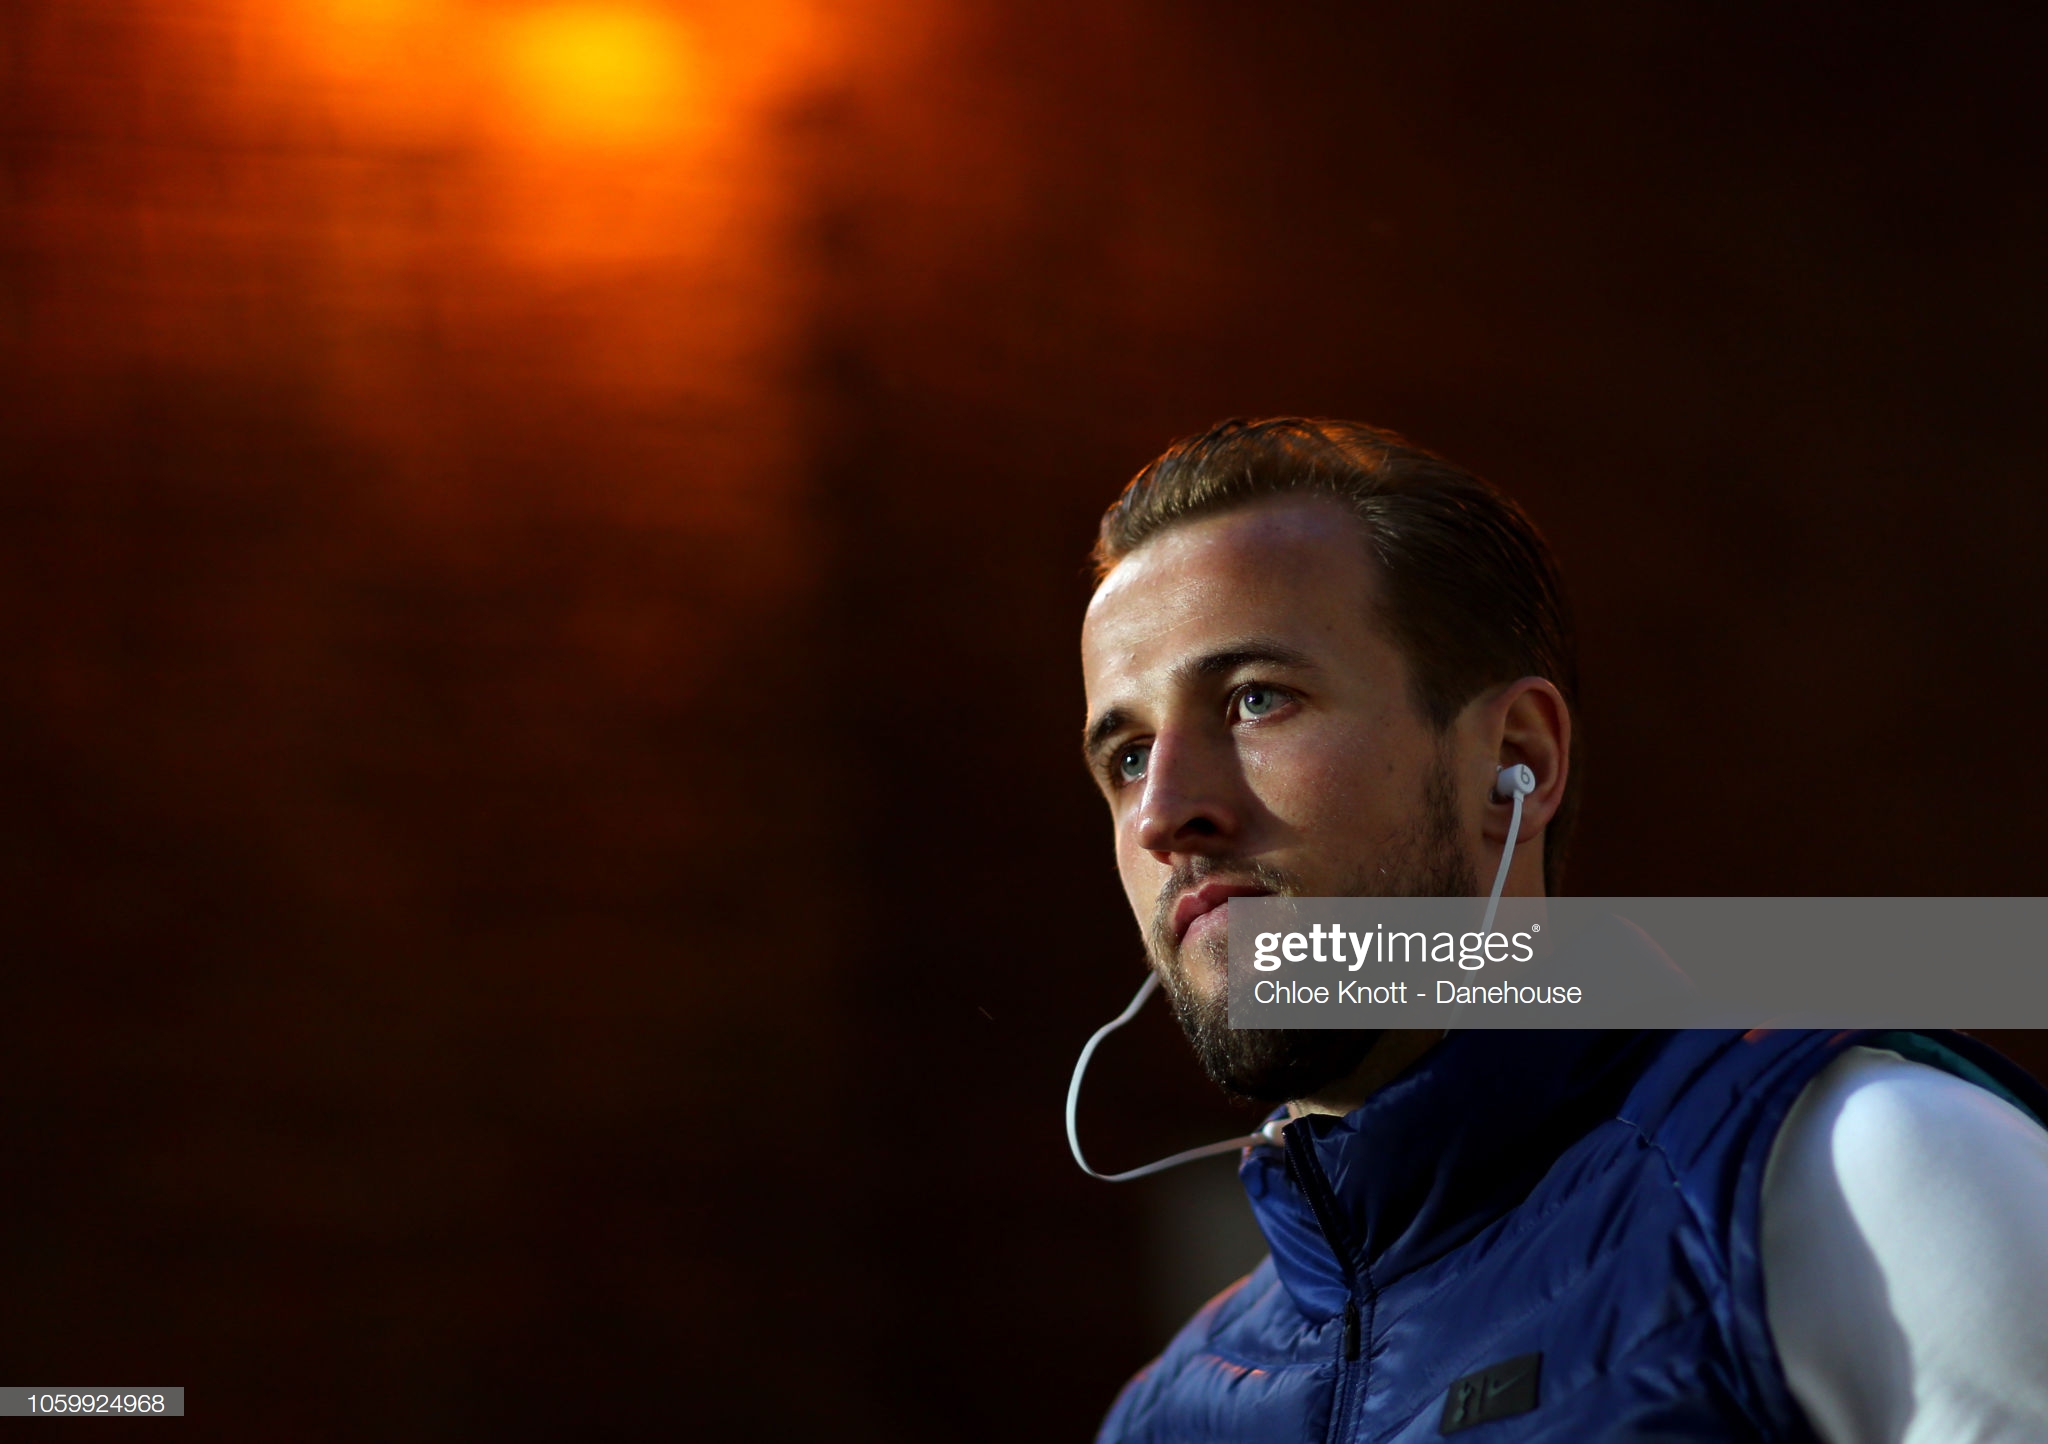 gettyimages-1059924968-2048x2048.jpg